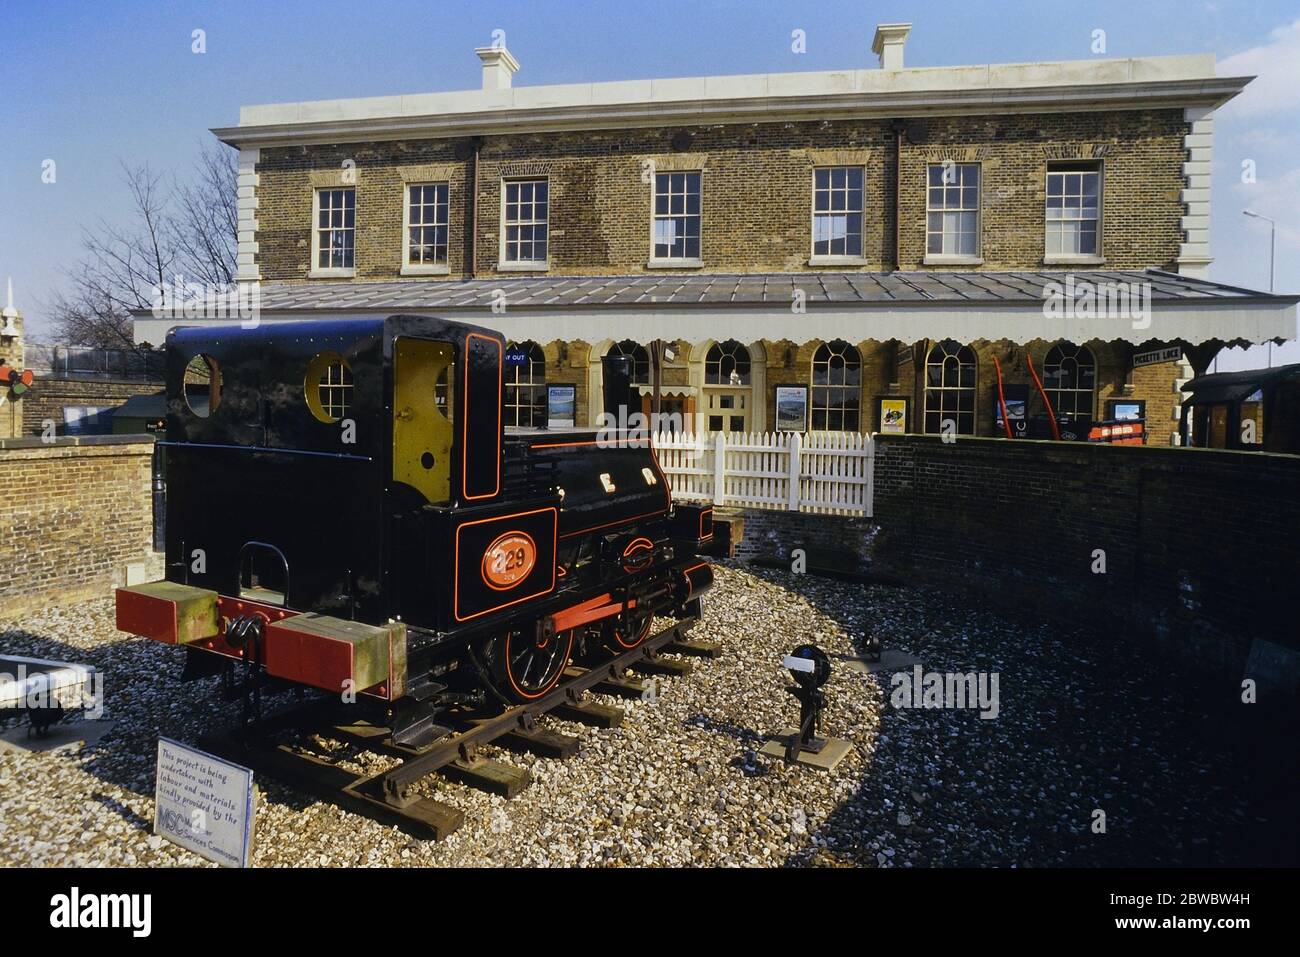 Steam locomotive, GER no. 229 (Coffee Pot) outside The former North Woolwich Old Station Museum, London, England, UK. Circa 1980's Stock Photo